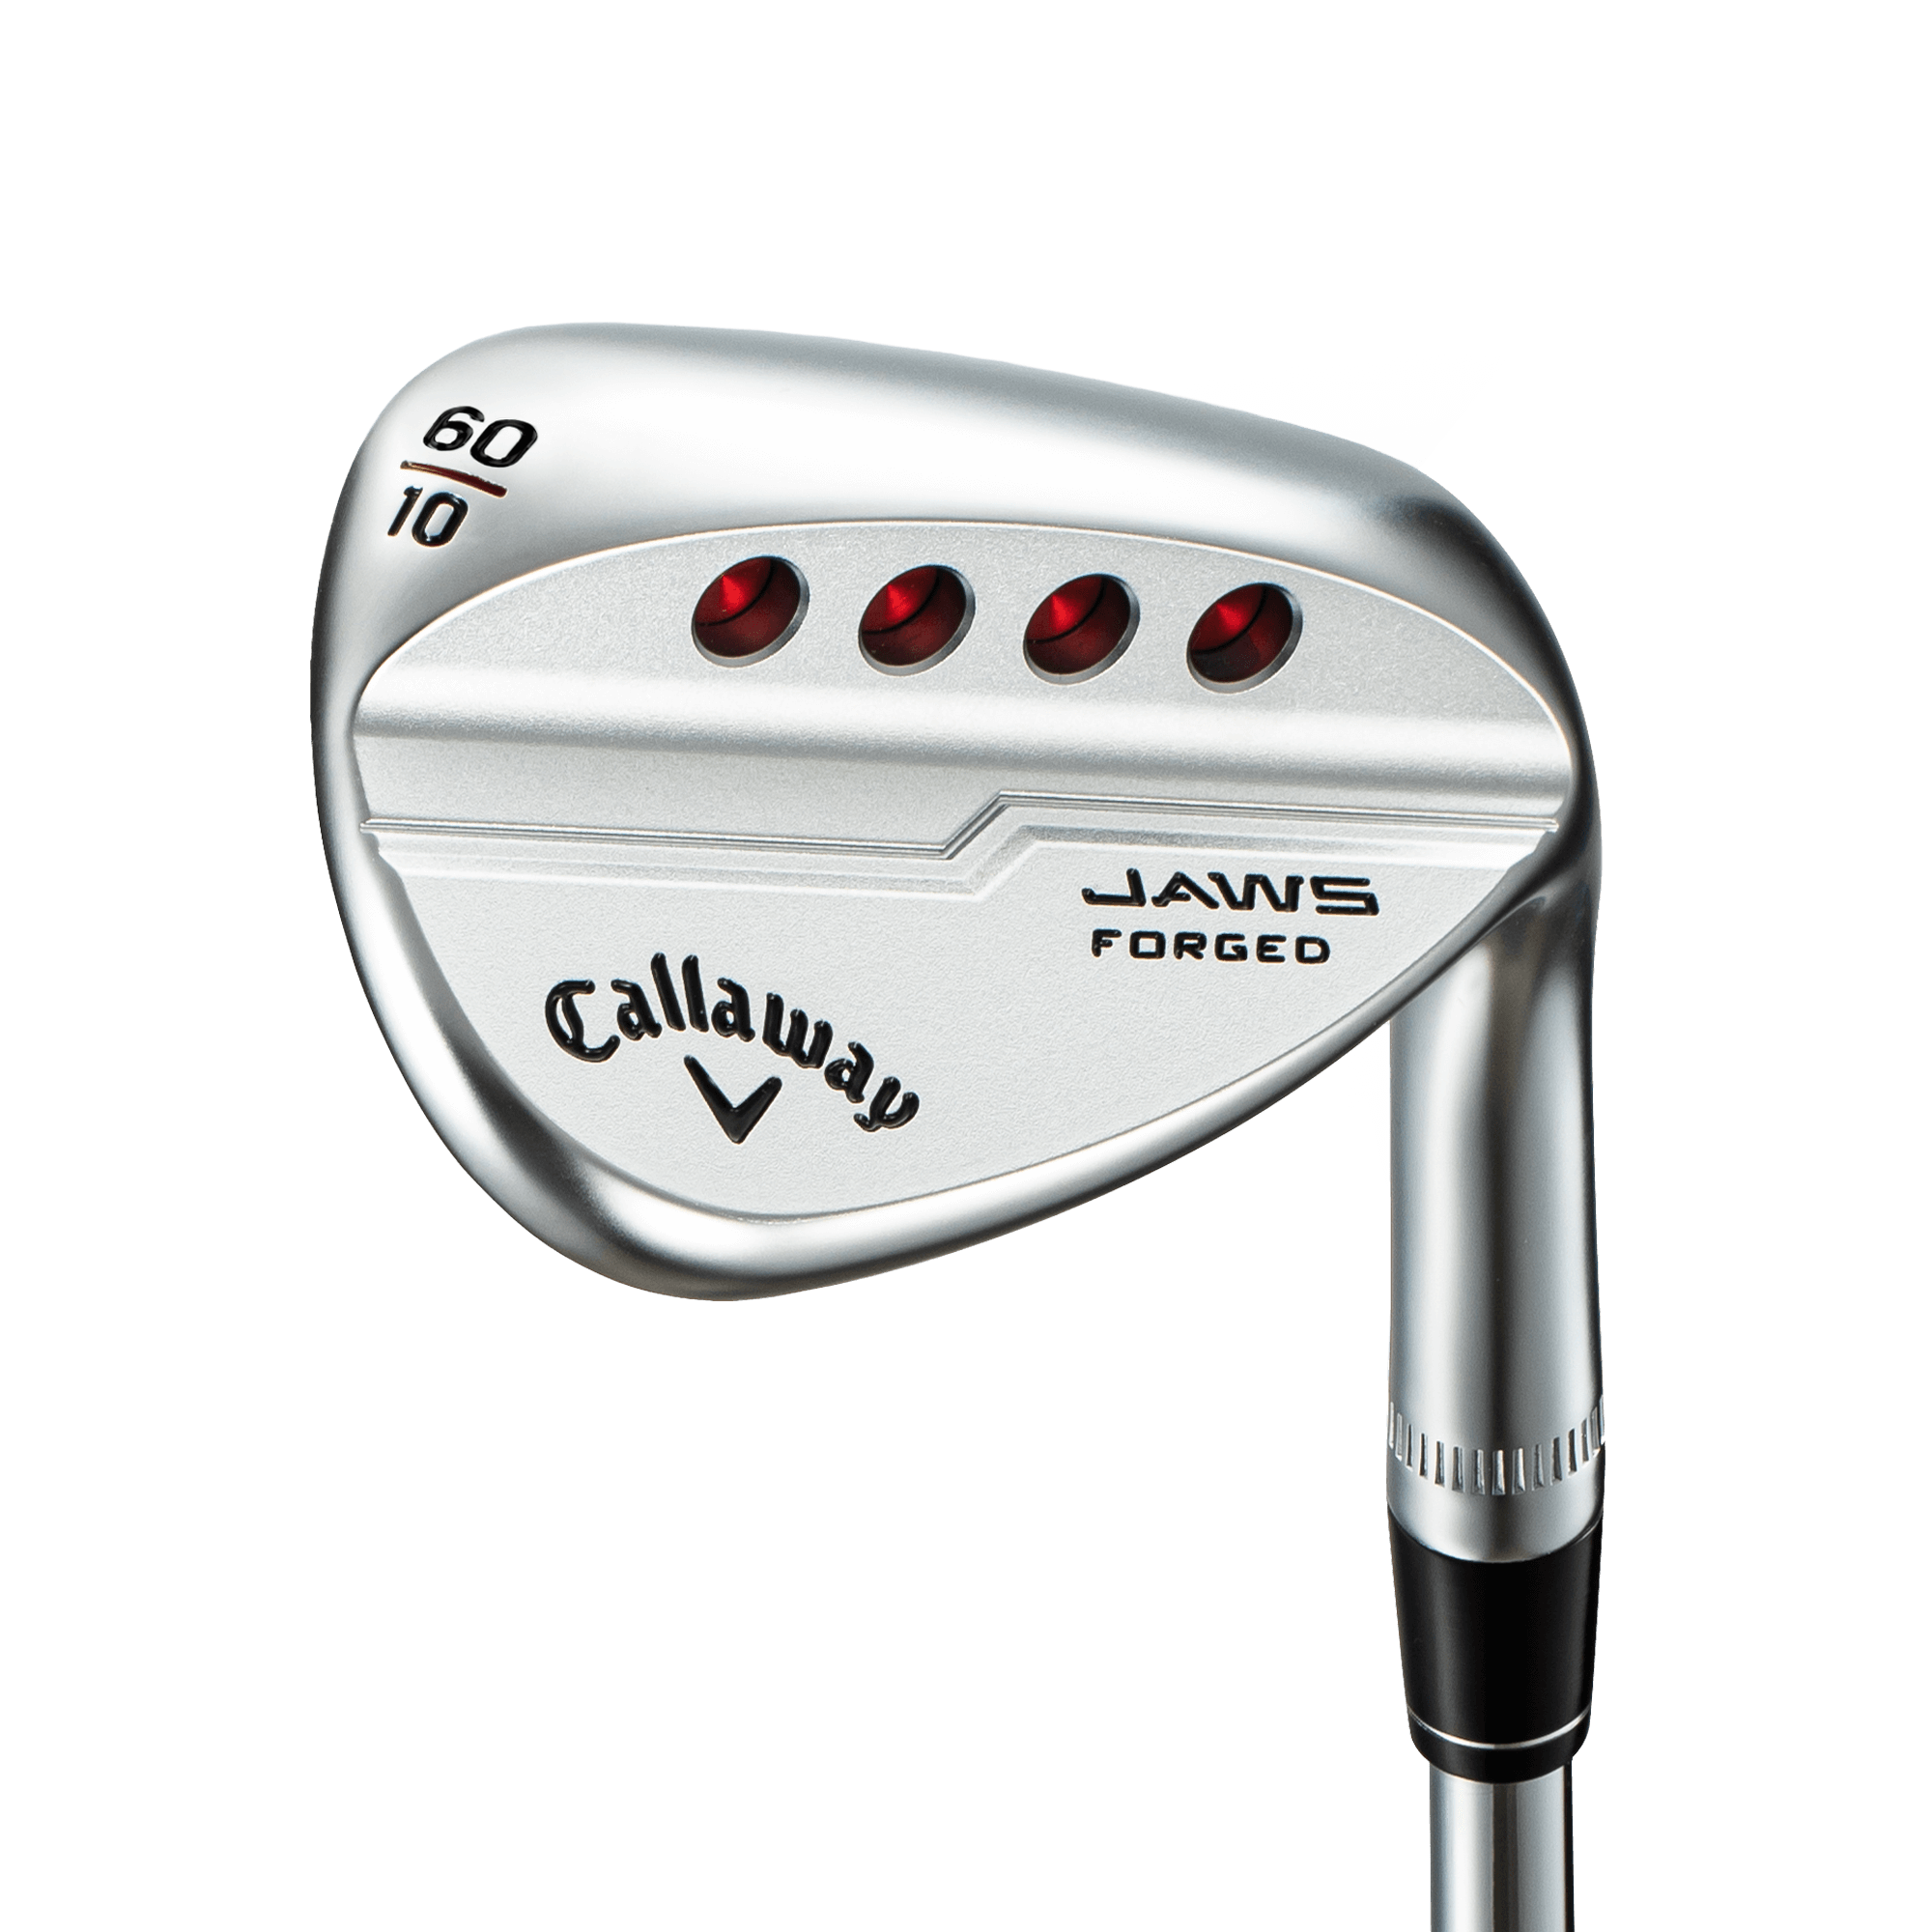 JAWS Forged Wedges | Callaway Golf | Specs, Reviews & Videos